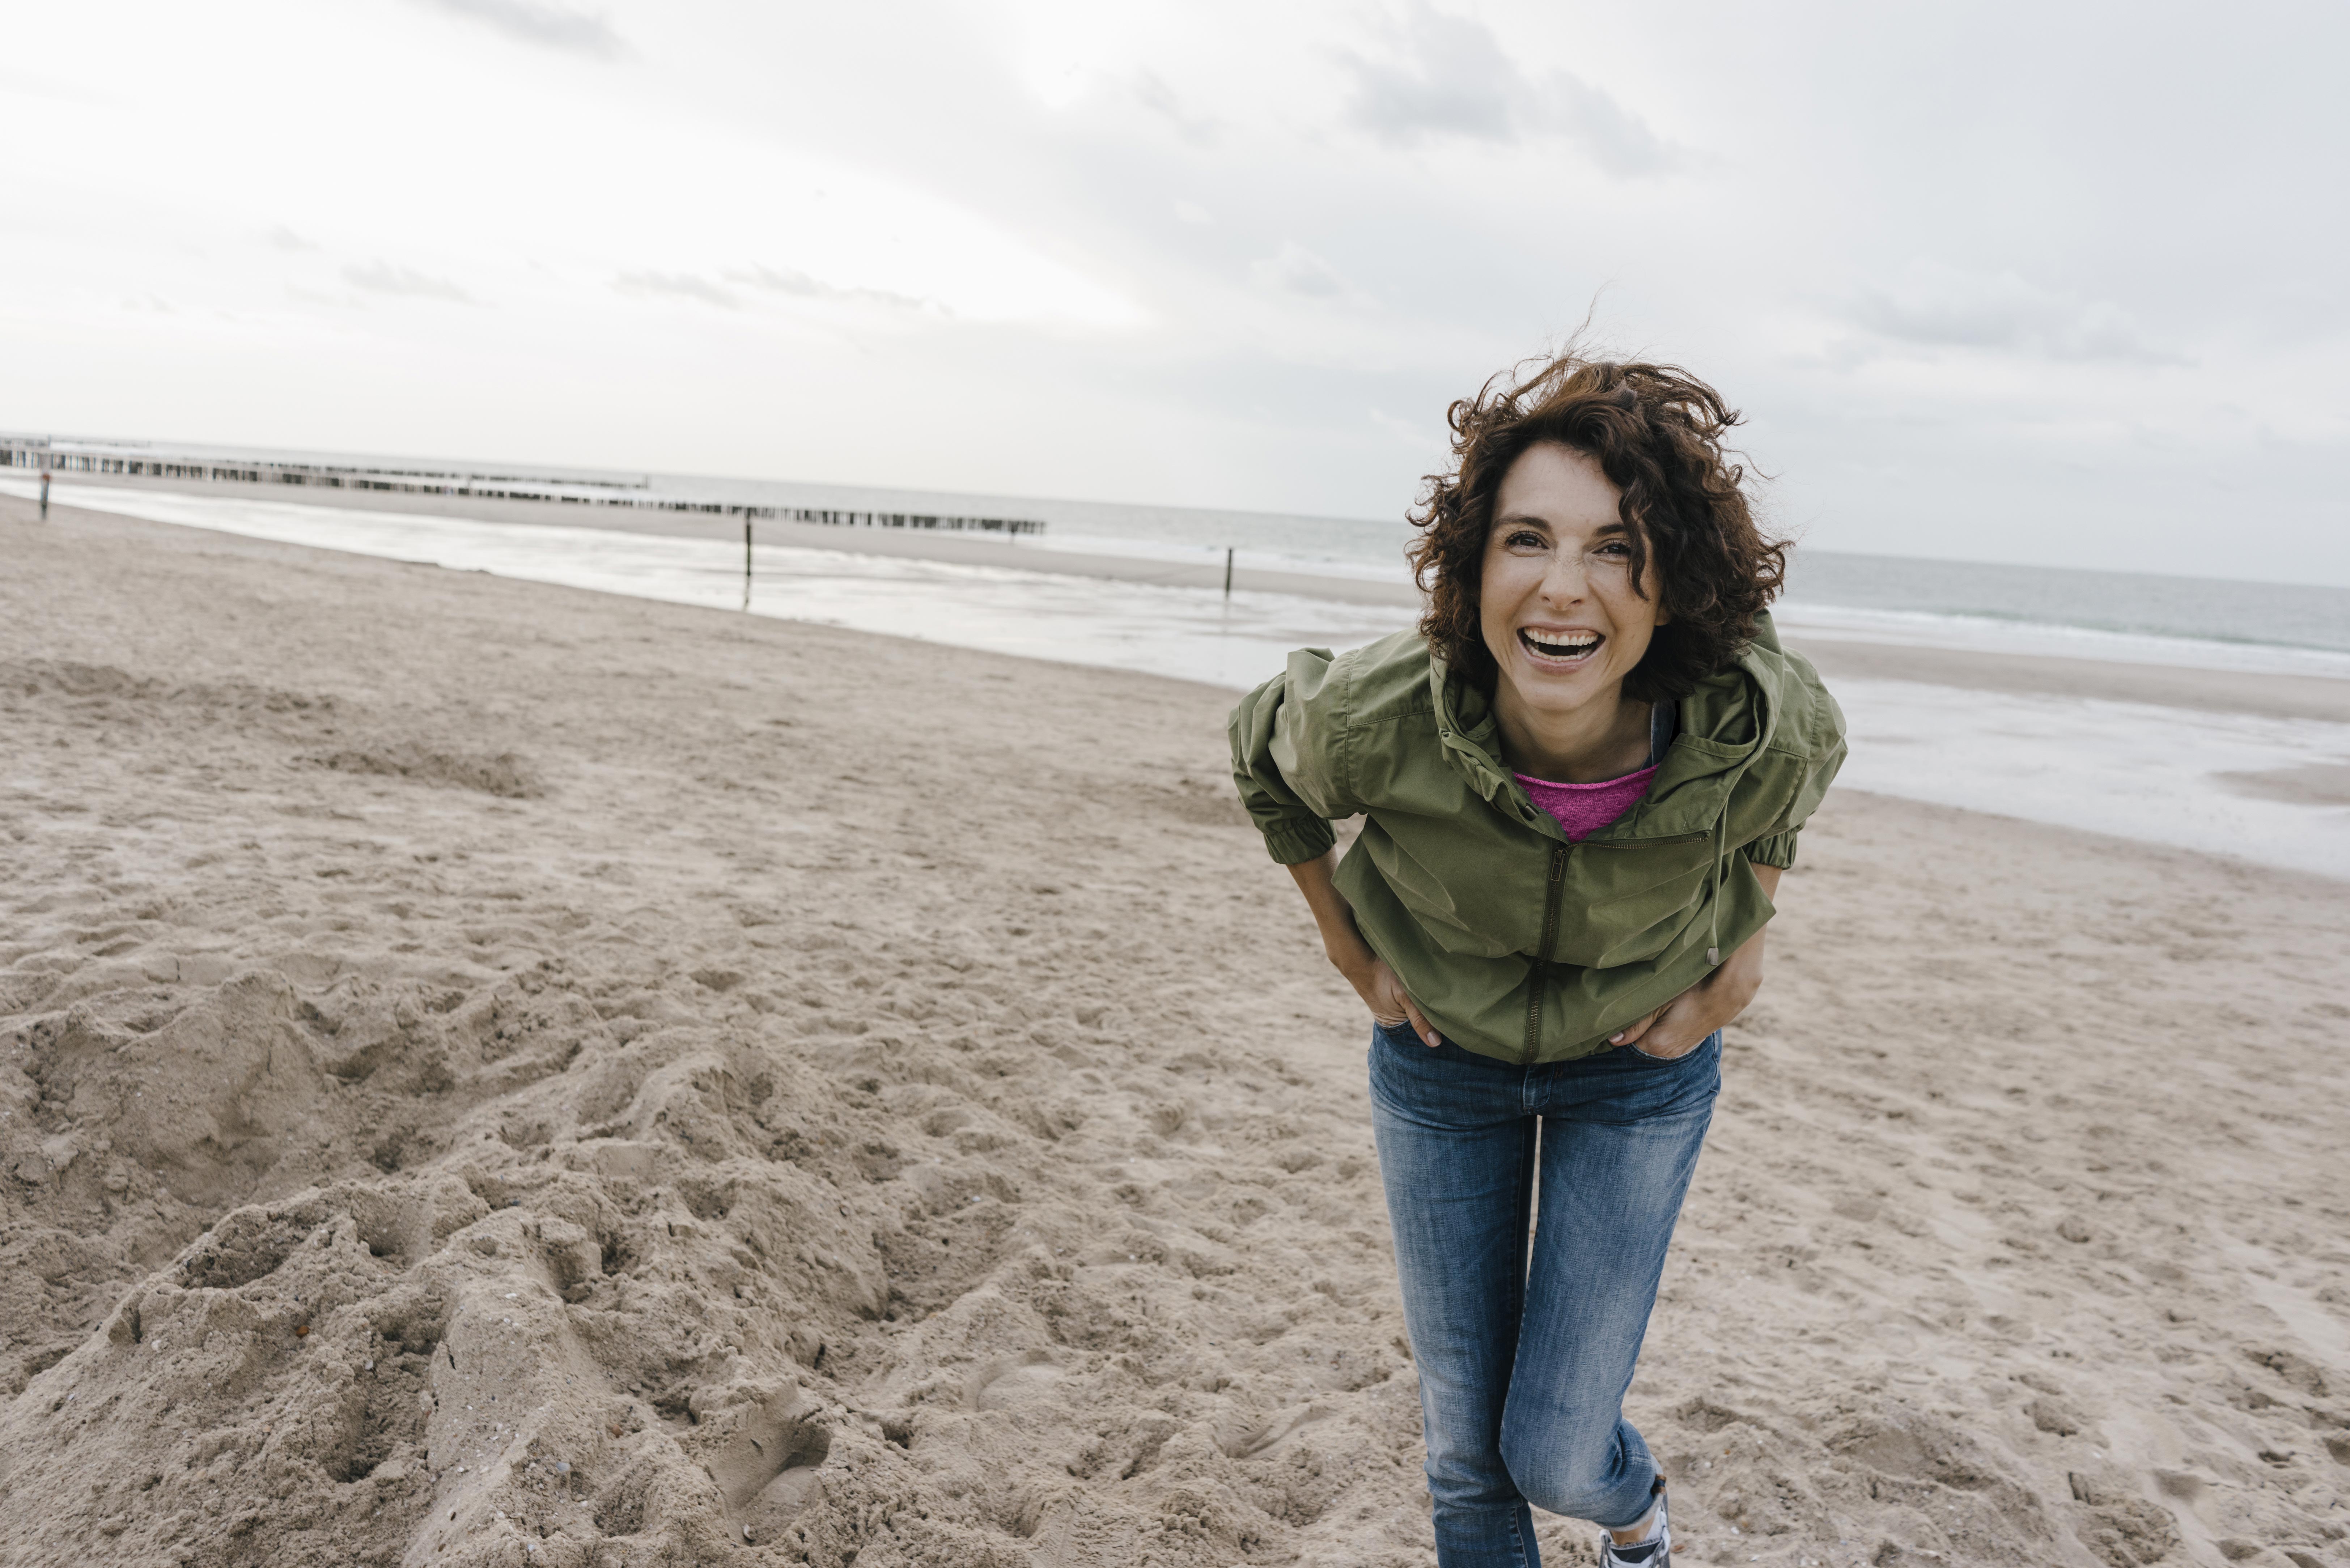 Holiday-let and staycation concept: Woman smiling and laughing on a beach